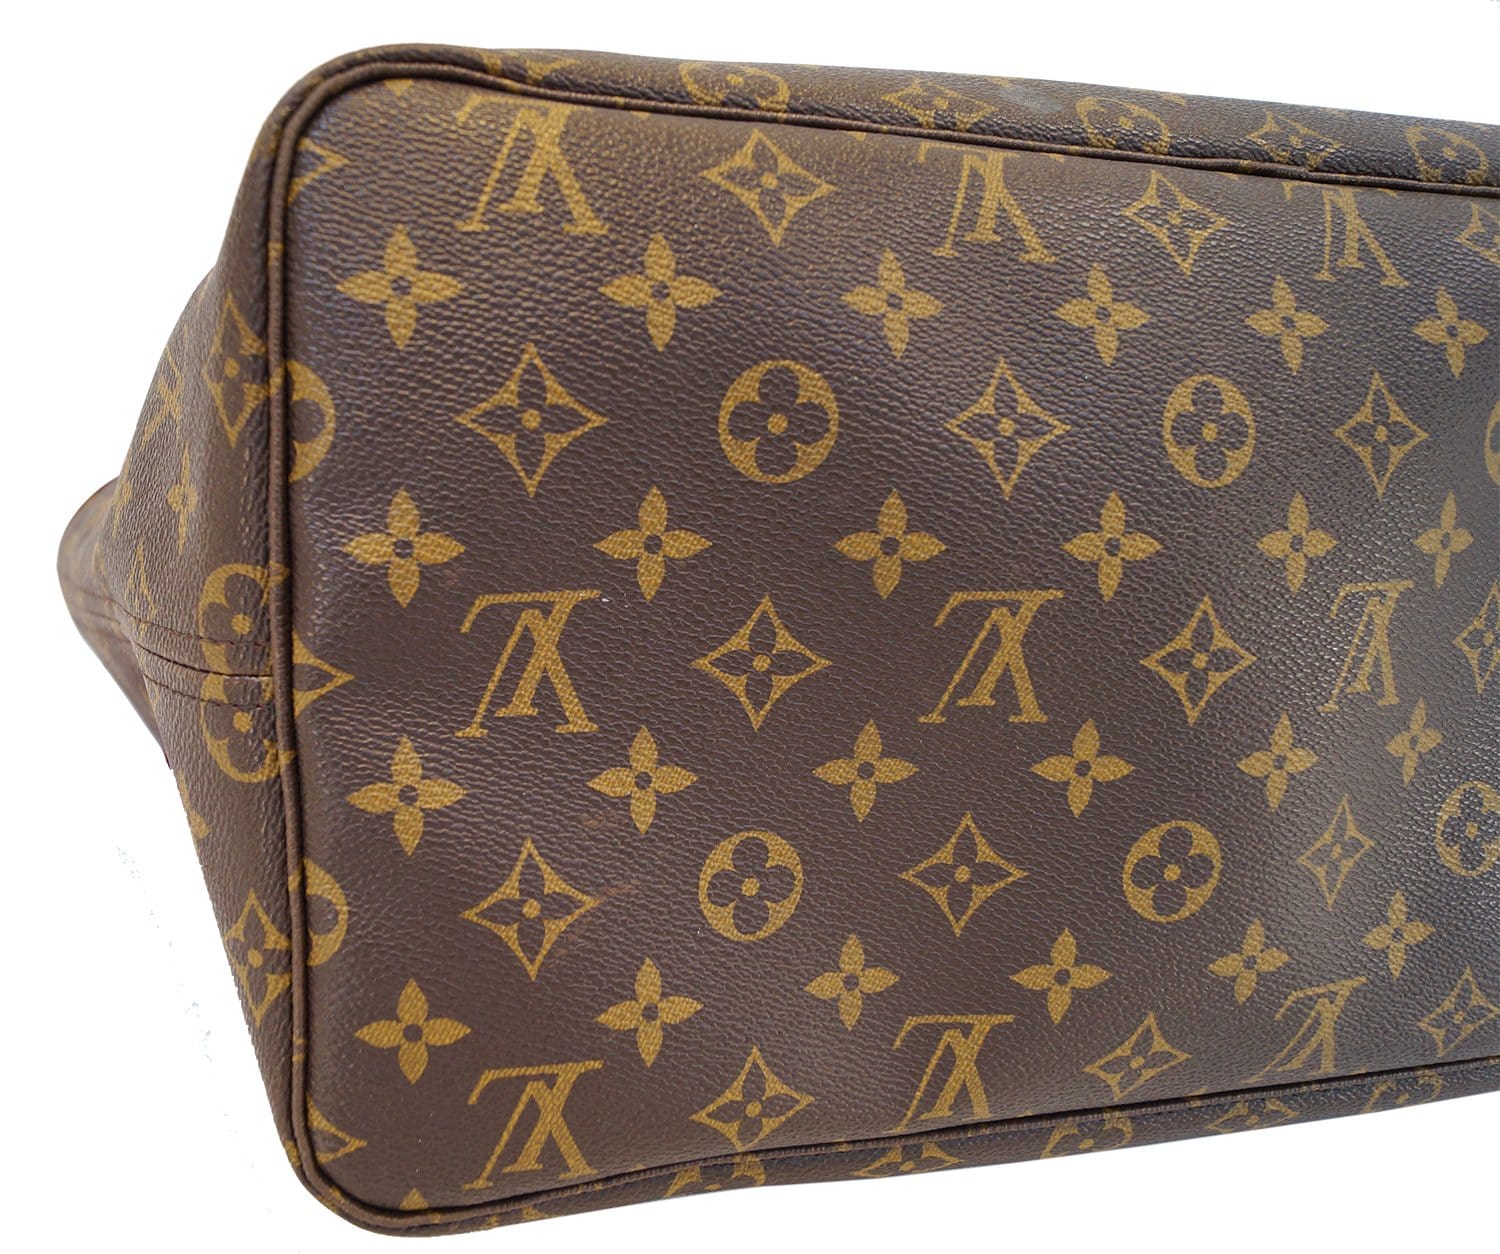 Louis Vuitton Neverfull Tote Limited Edition Ikat Monogram Canvas